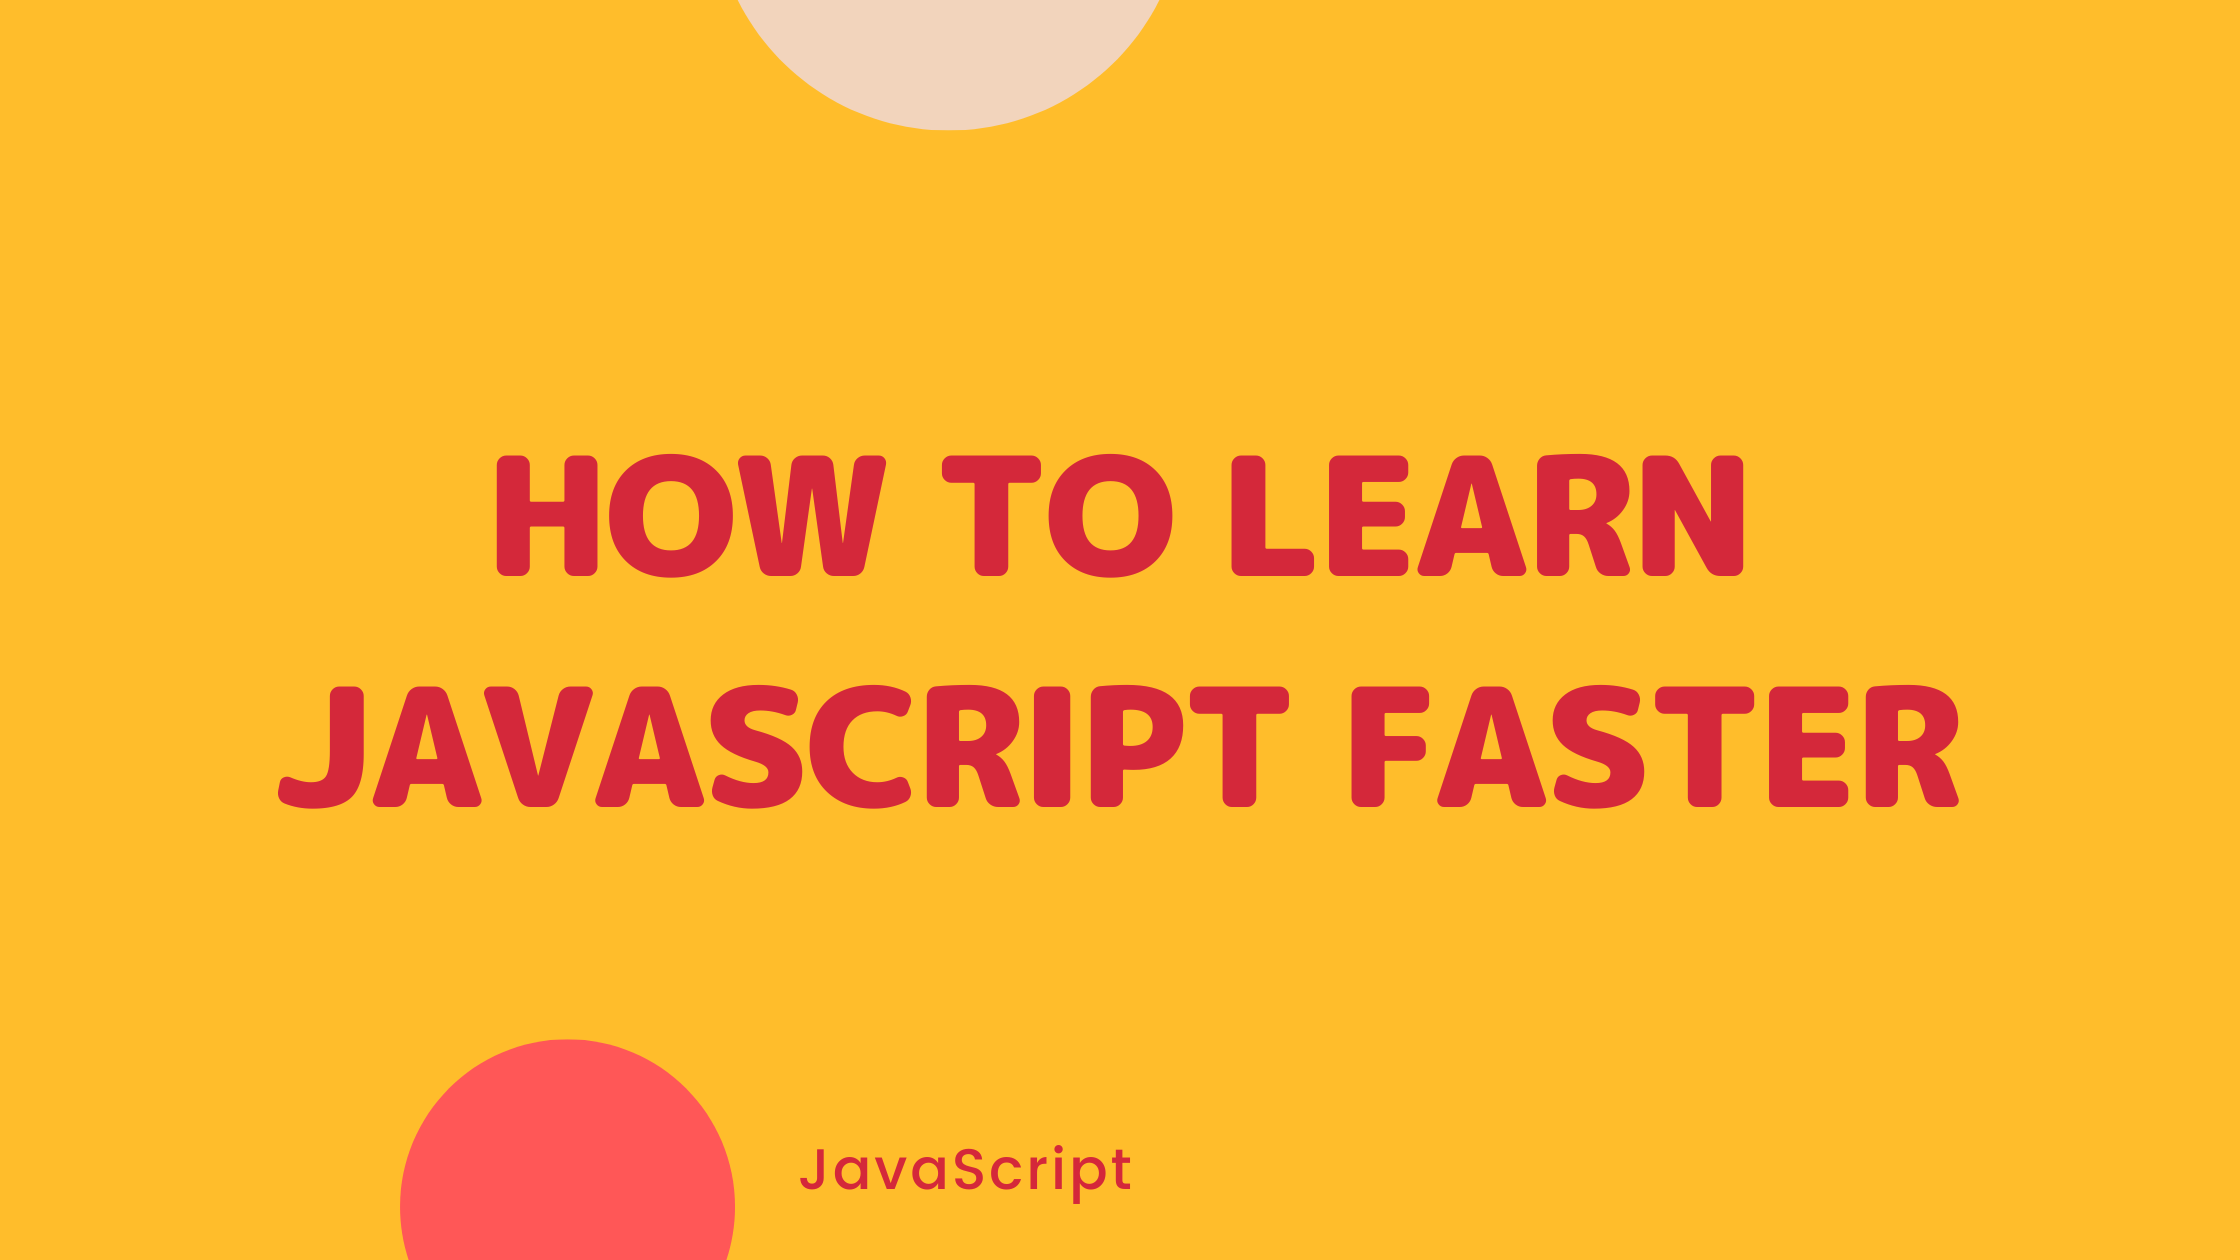 How to Learn JavaScript Faster – Tips and Resources to Get Started Coding JS